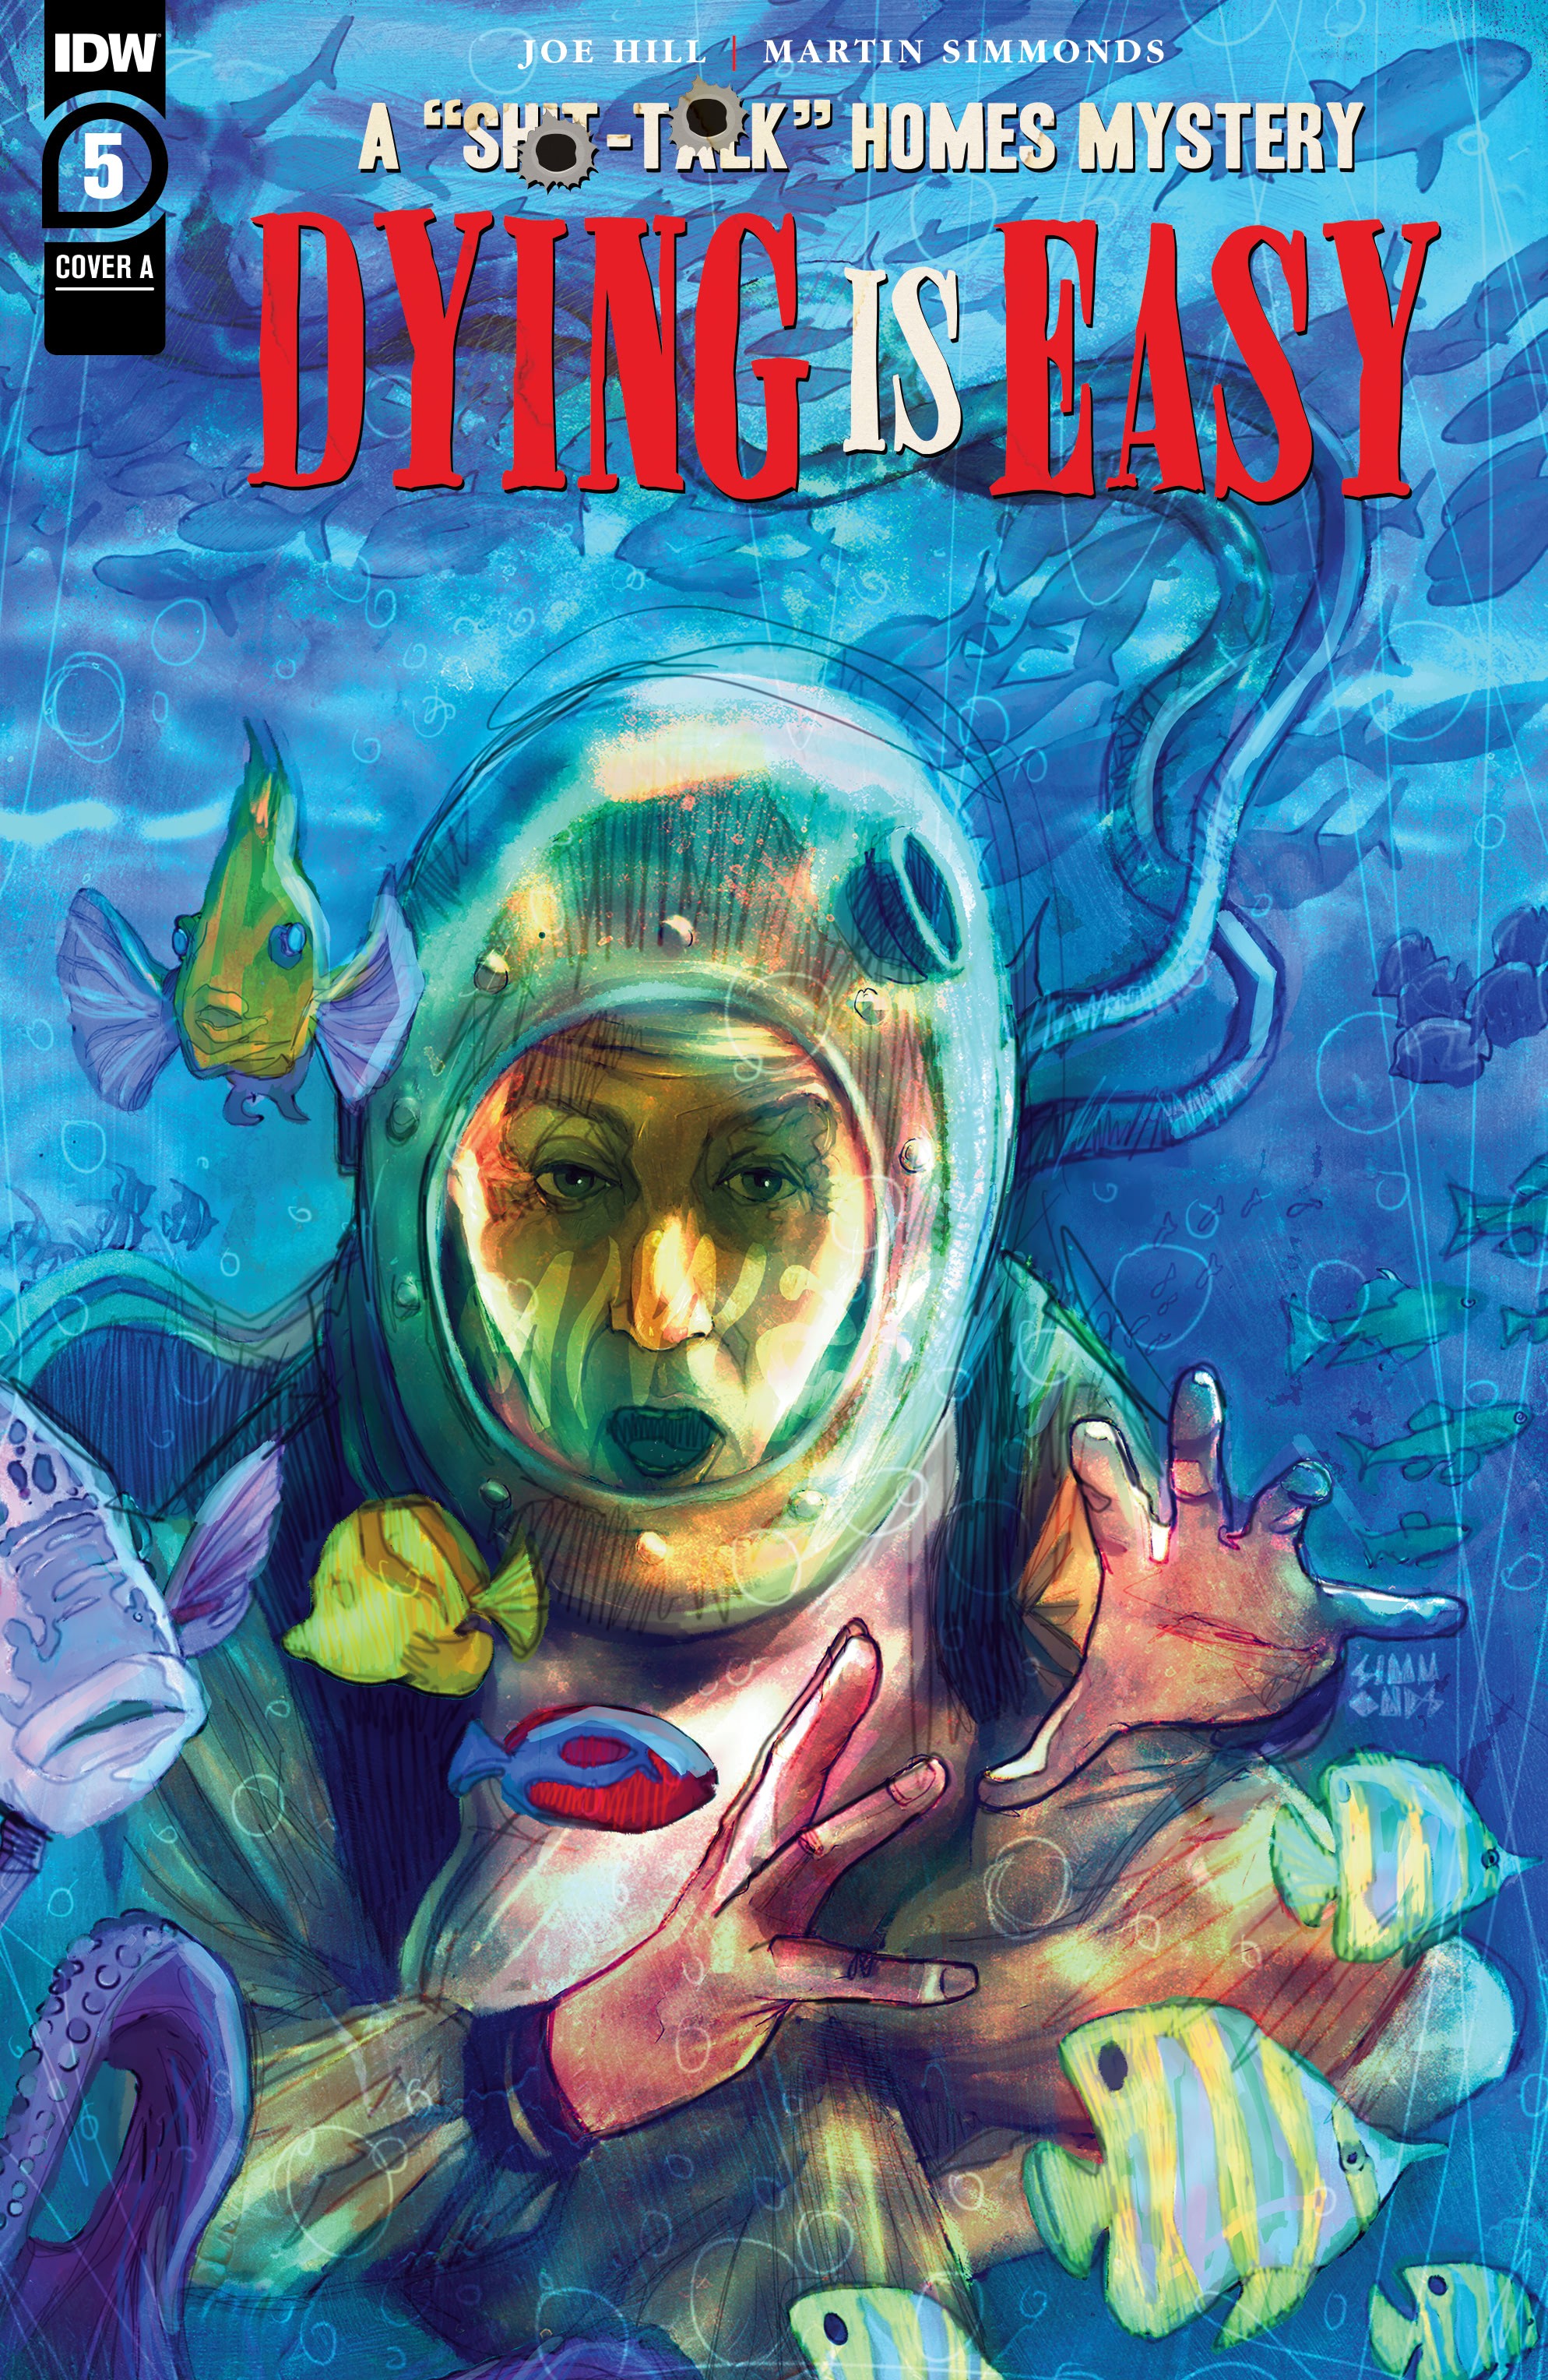 Read online Dying is Easy comic -  Issue #5 - 1